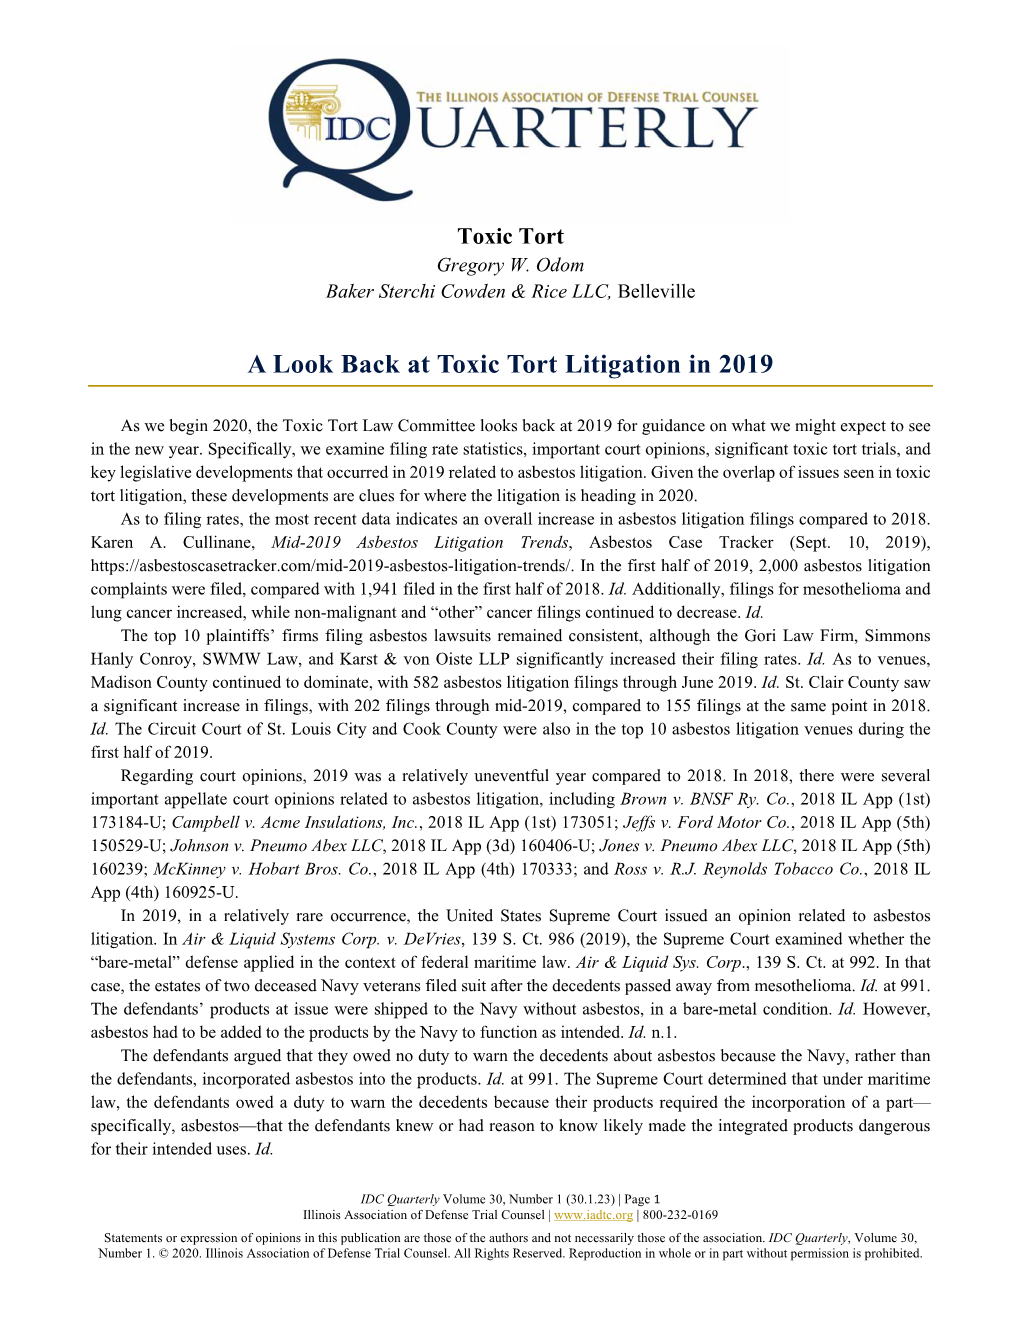 A Look Back at Toxic Tort Litigation in 2019